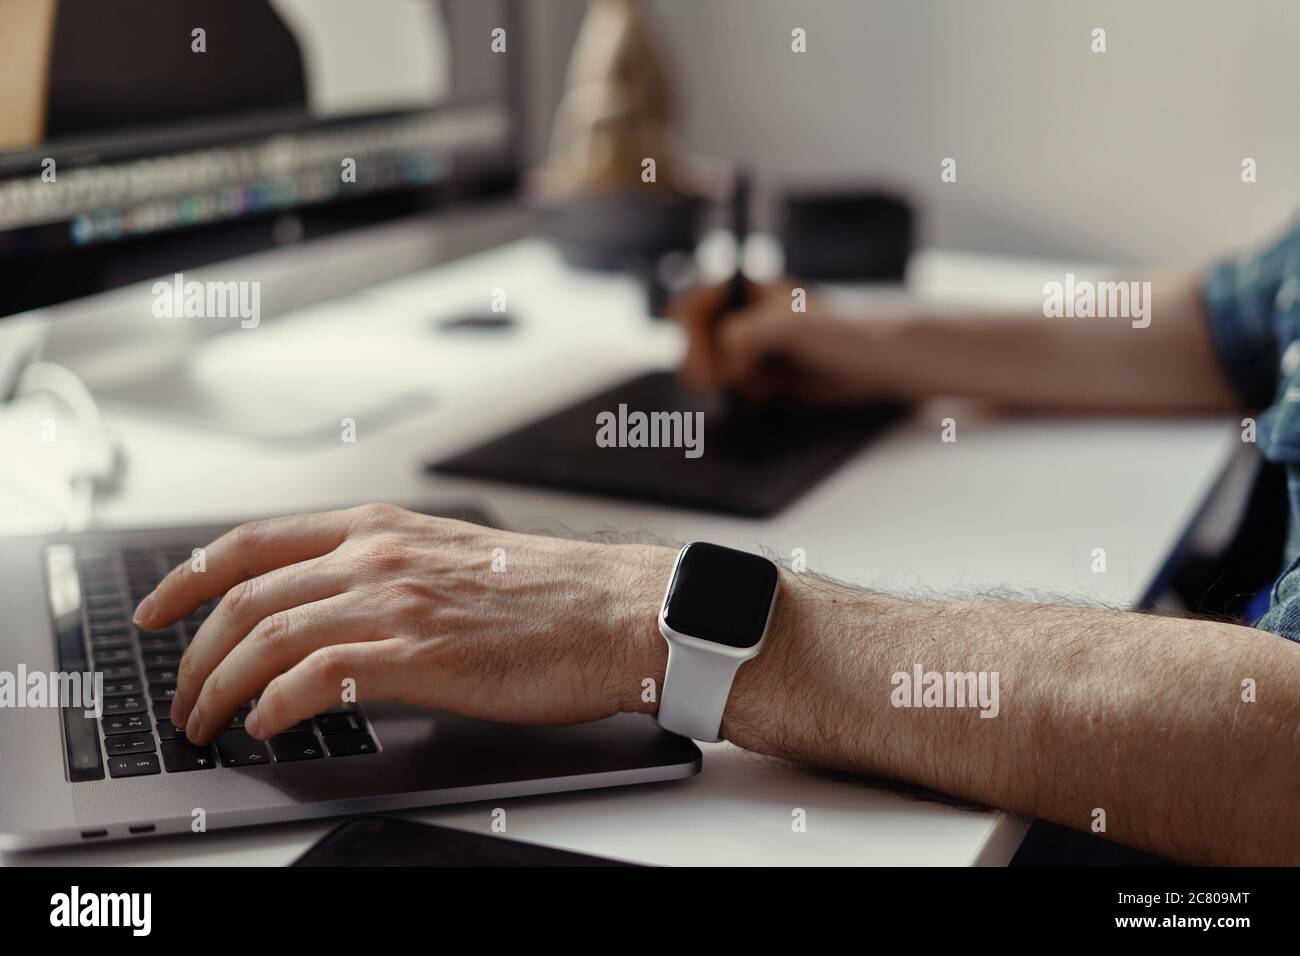 Graphic Designer working hands with interactive pen display, digital Drawing tablet and Pen. Concept of young people works mobile devices. Stock Photo